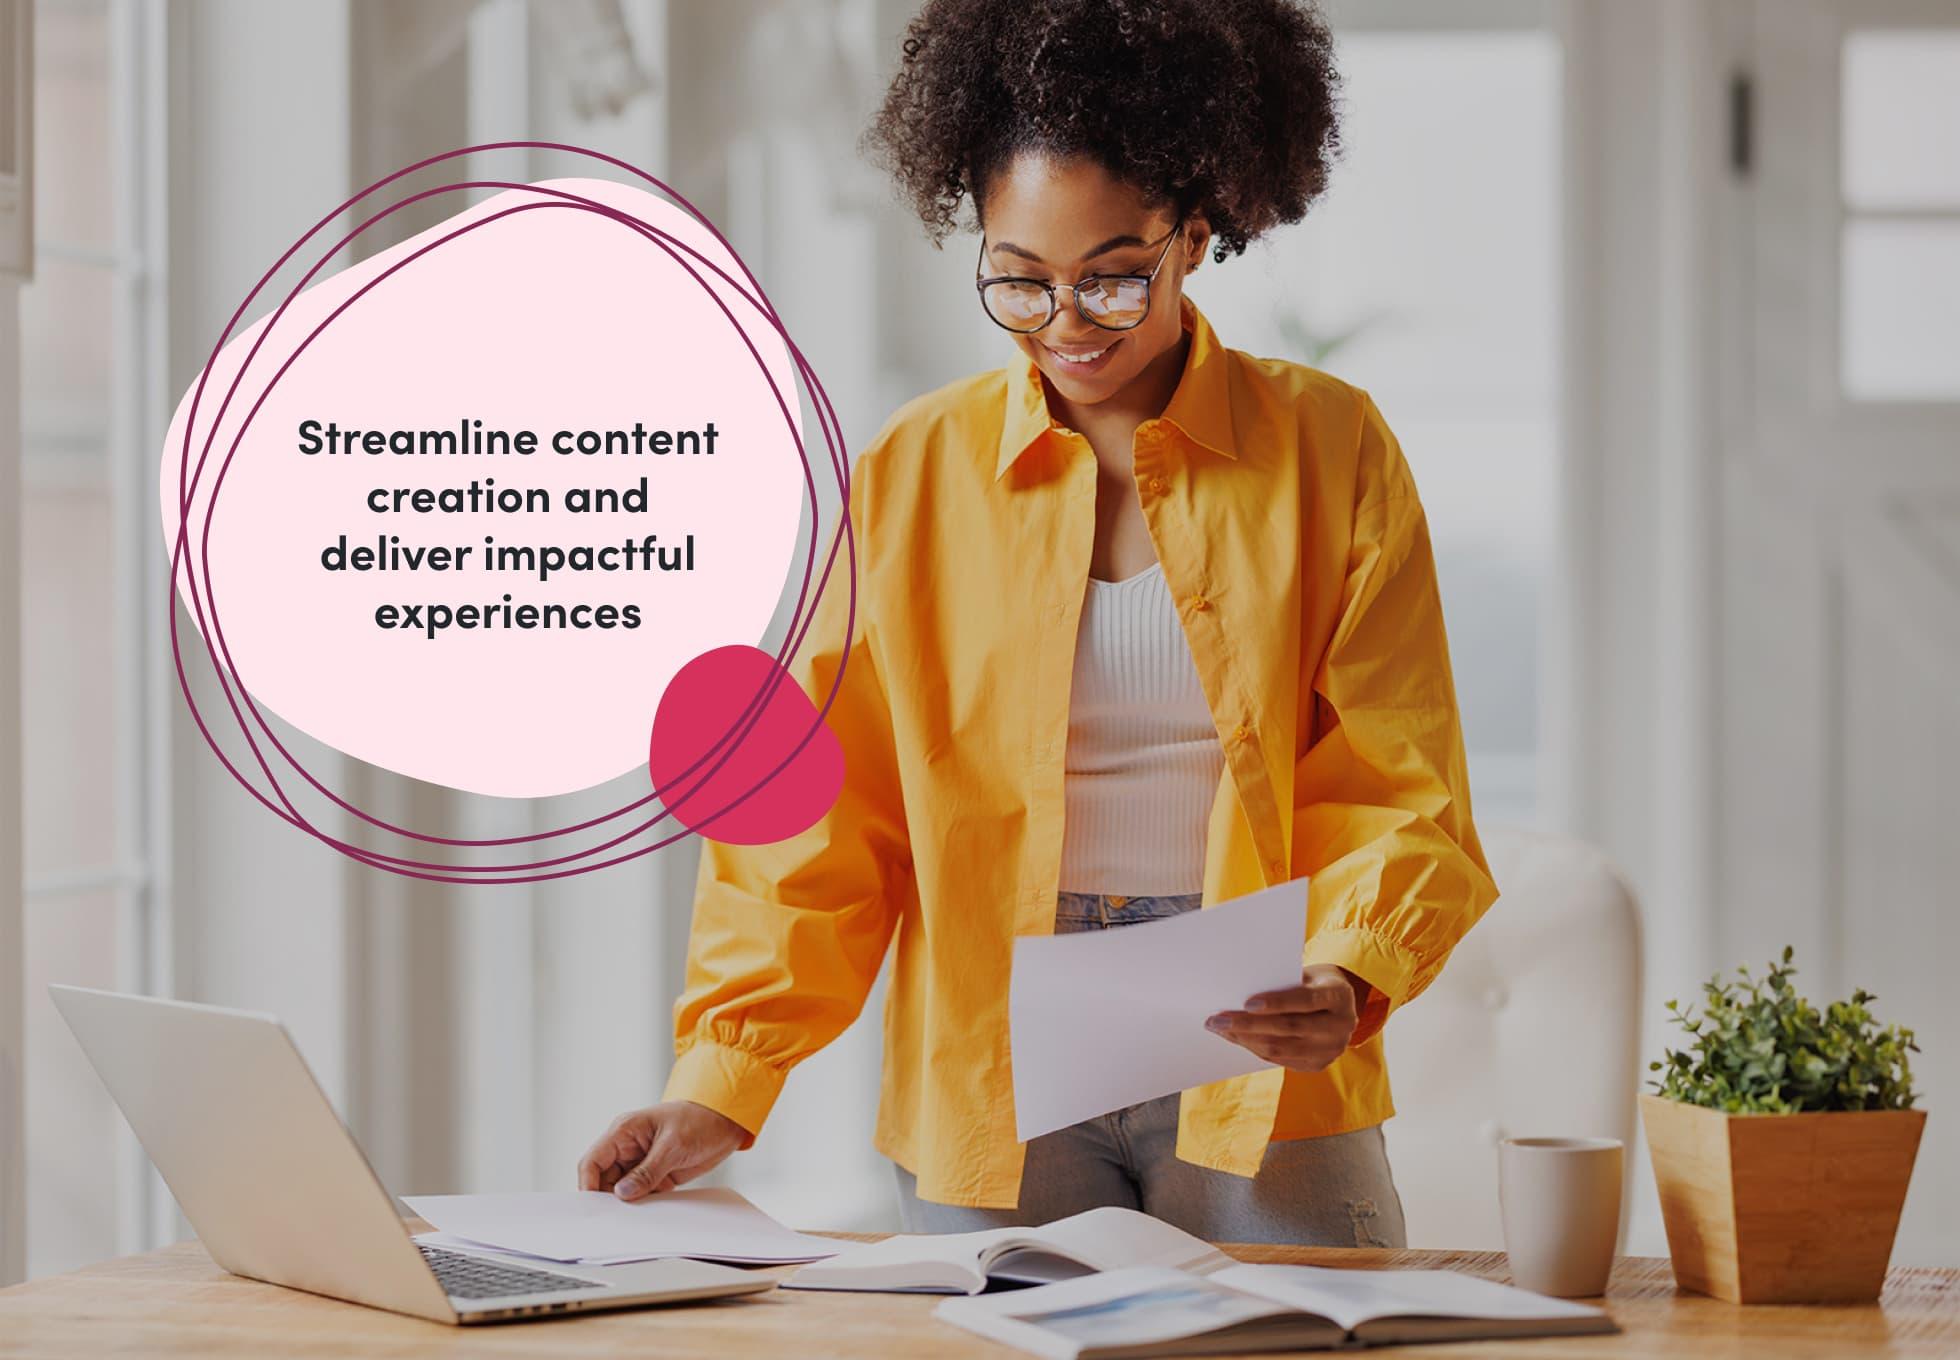 A person in a yellow shirt is standing over a desk holding papers and looking at a laptop. The text imposed overtop says "Streamline content creation and deliver impactful experiences."